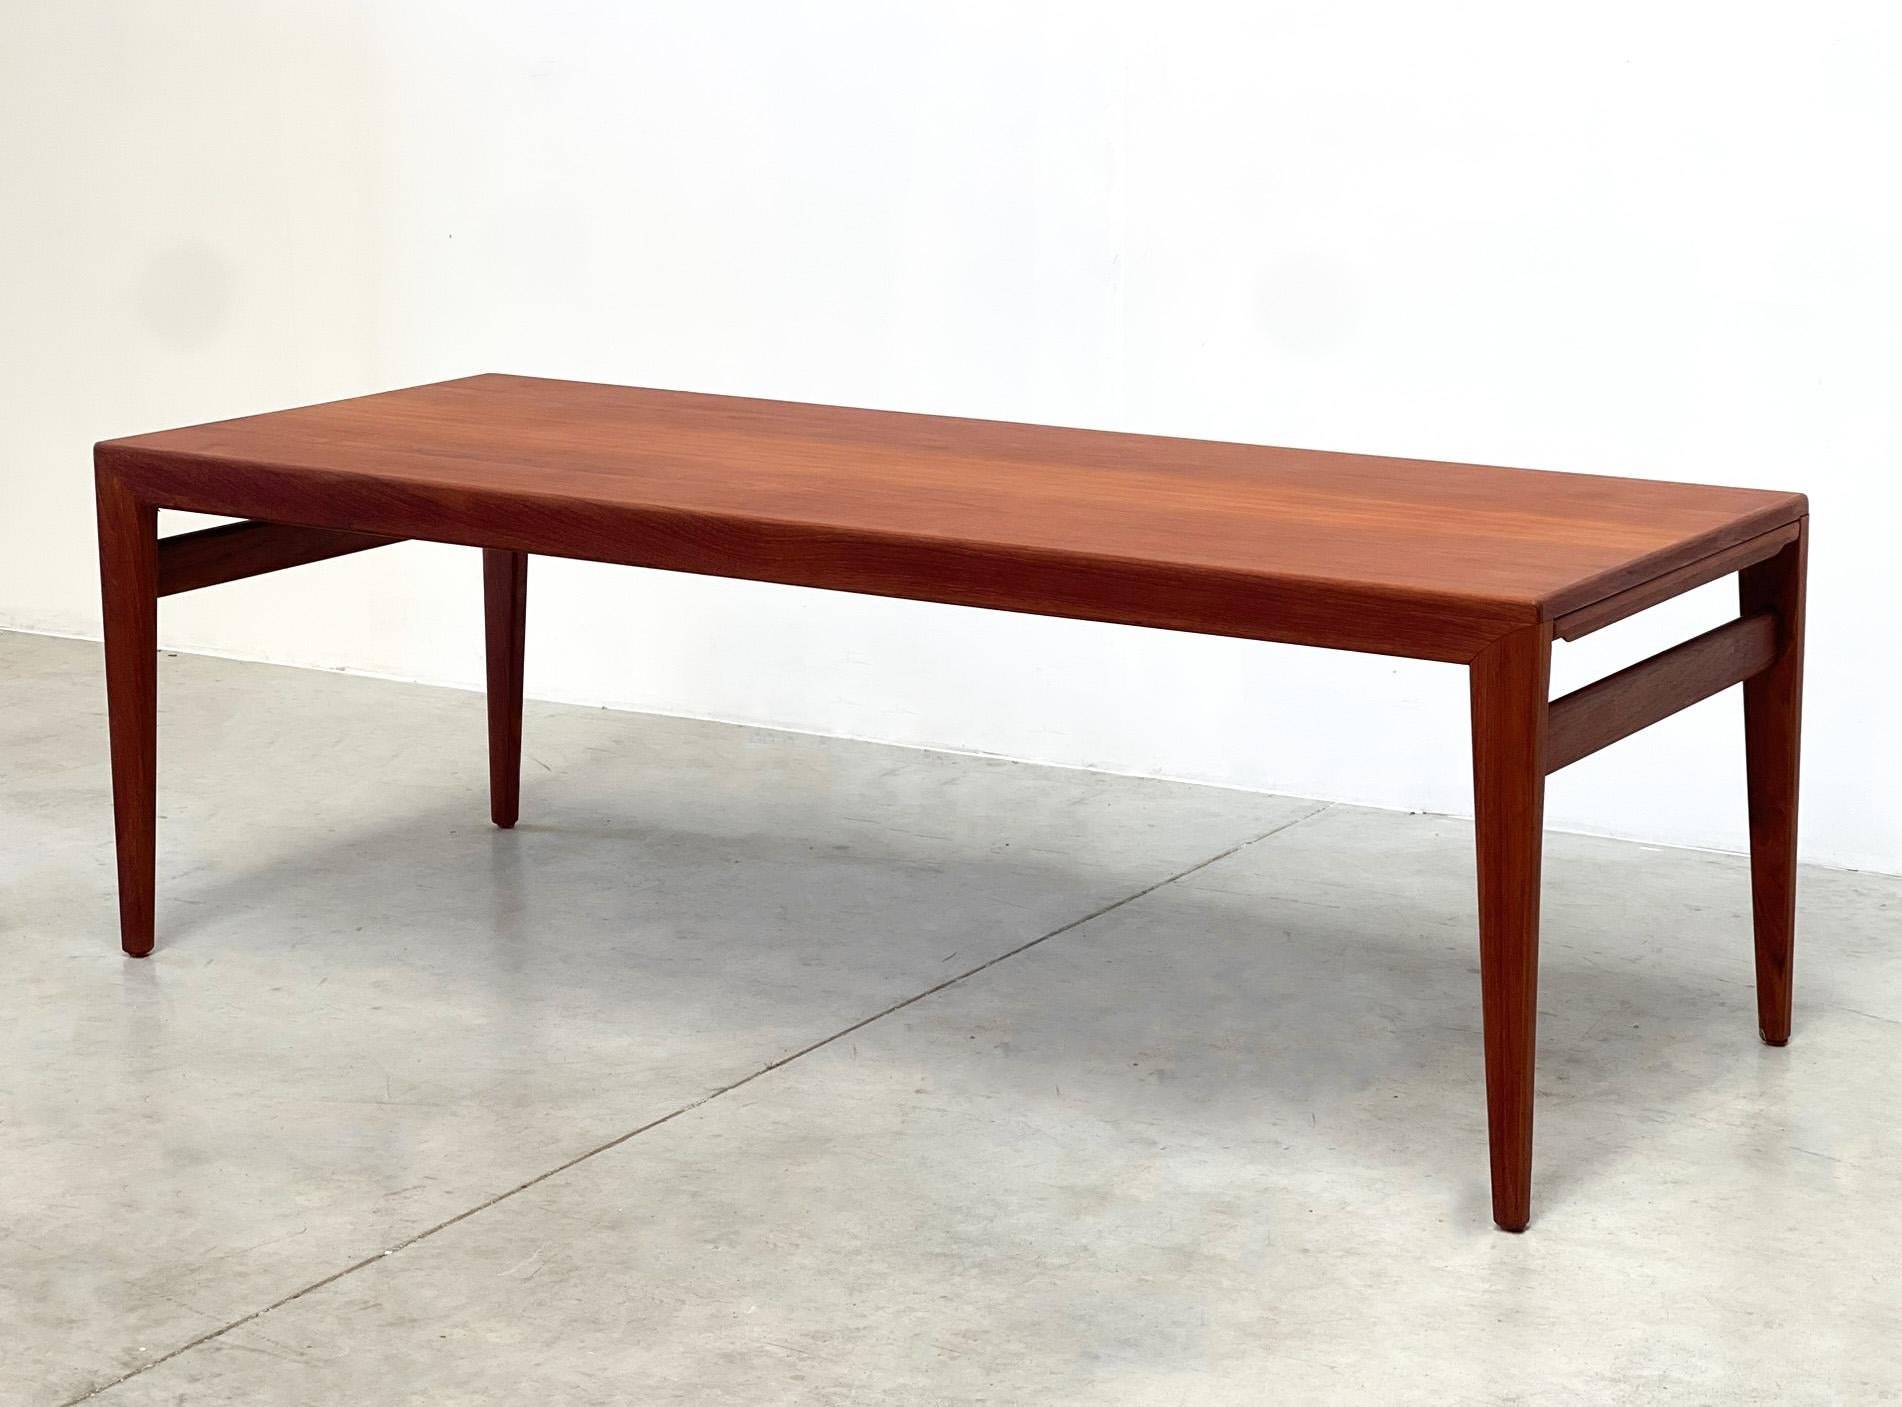 Johannes Anders Coffee table
Very nice and versitile coffee table made in Denmark in the 70s. The table was designed by 1 of the most famous danish designers Johannes Anderssen. Johannes designed this table for the factory Uldum Møbelfabrik. The